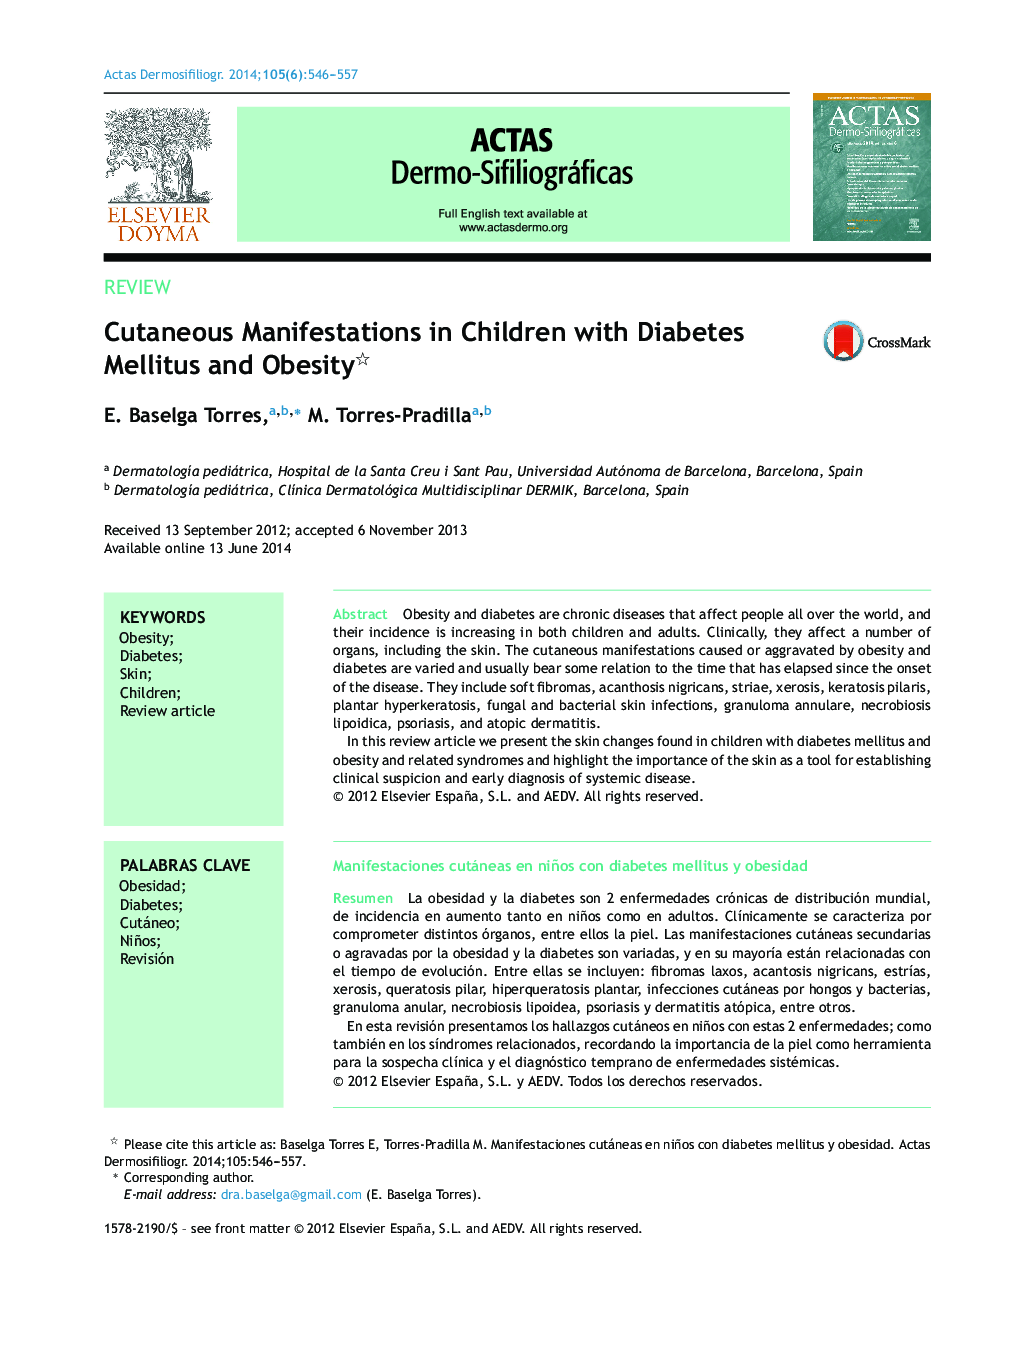 Cutaneous Manifestations in Children with Diabetes Mellitus and Obesity 